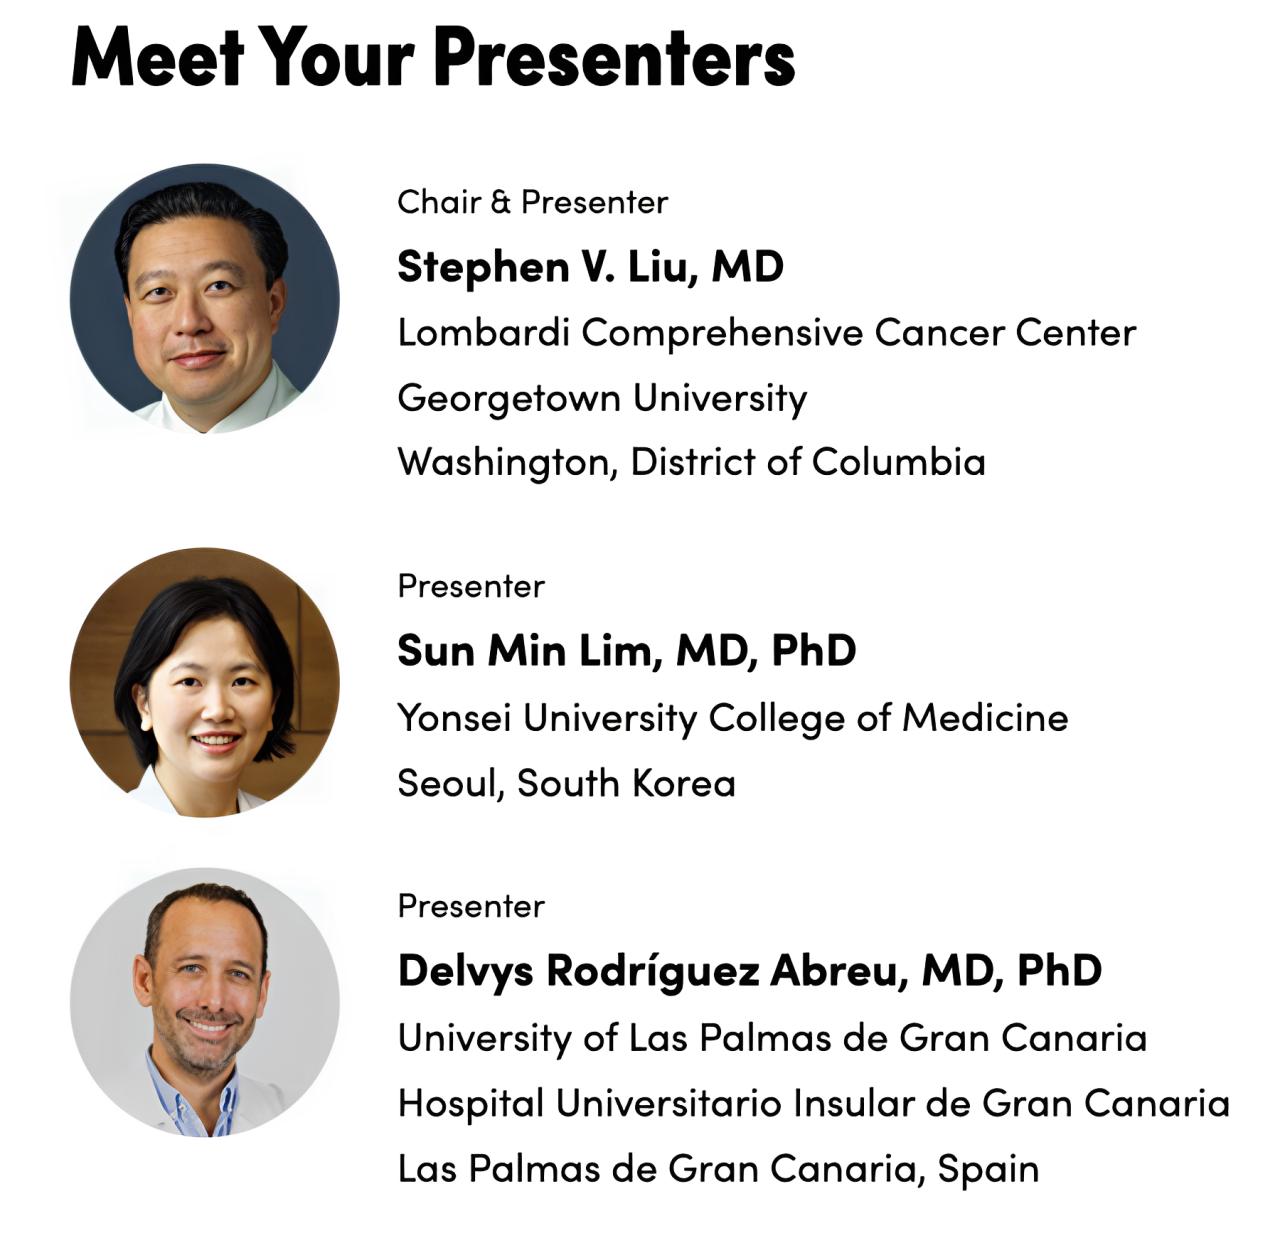 Stephen V Liu: Join me in Singapore (or virtually) for WCLC23 on Saturday, September 9th.